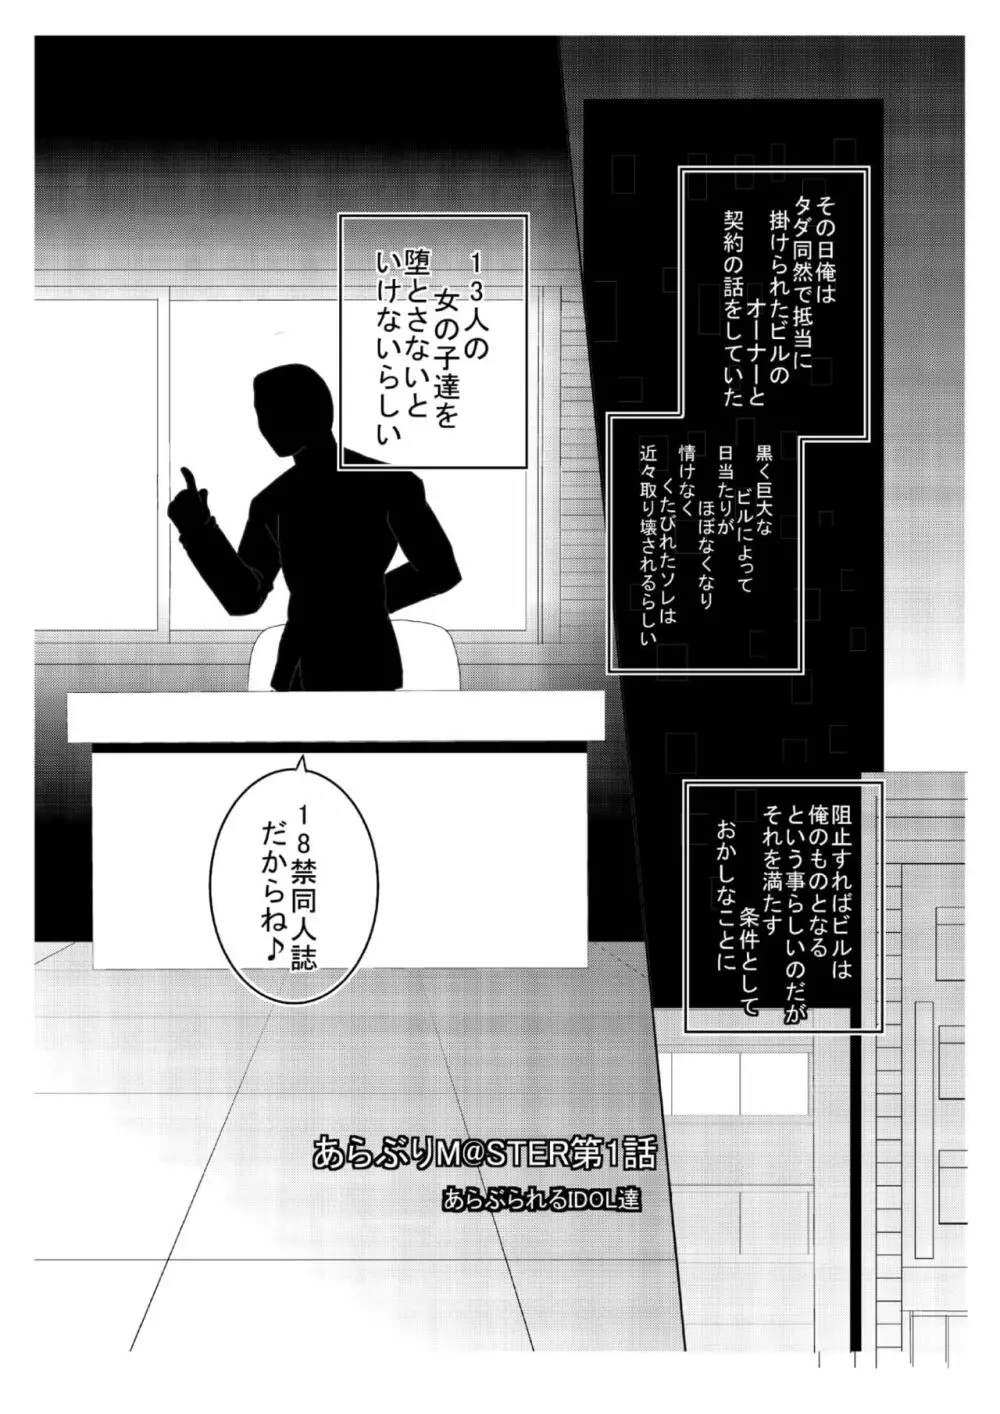 THEあらぶりM@STER - page4